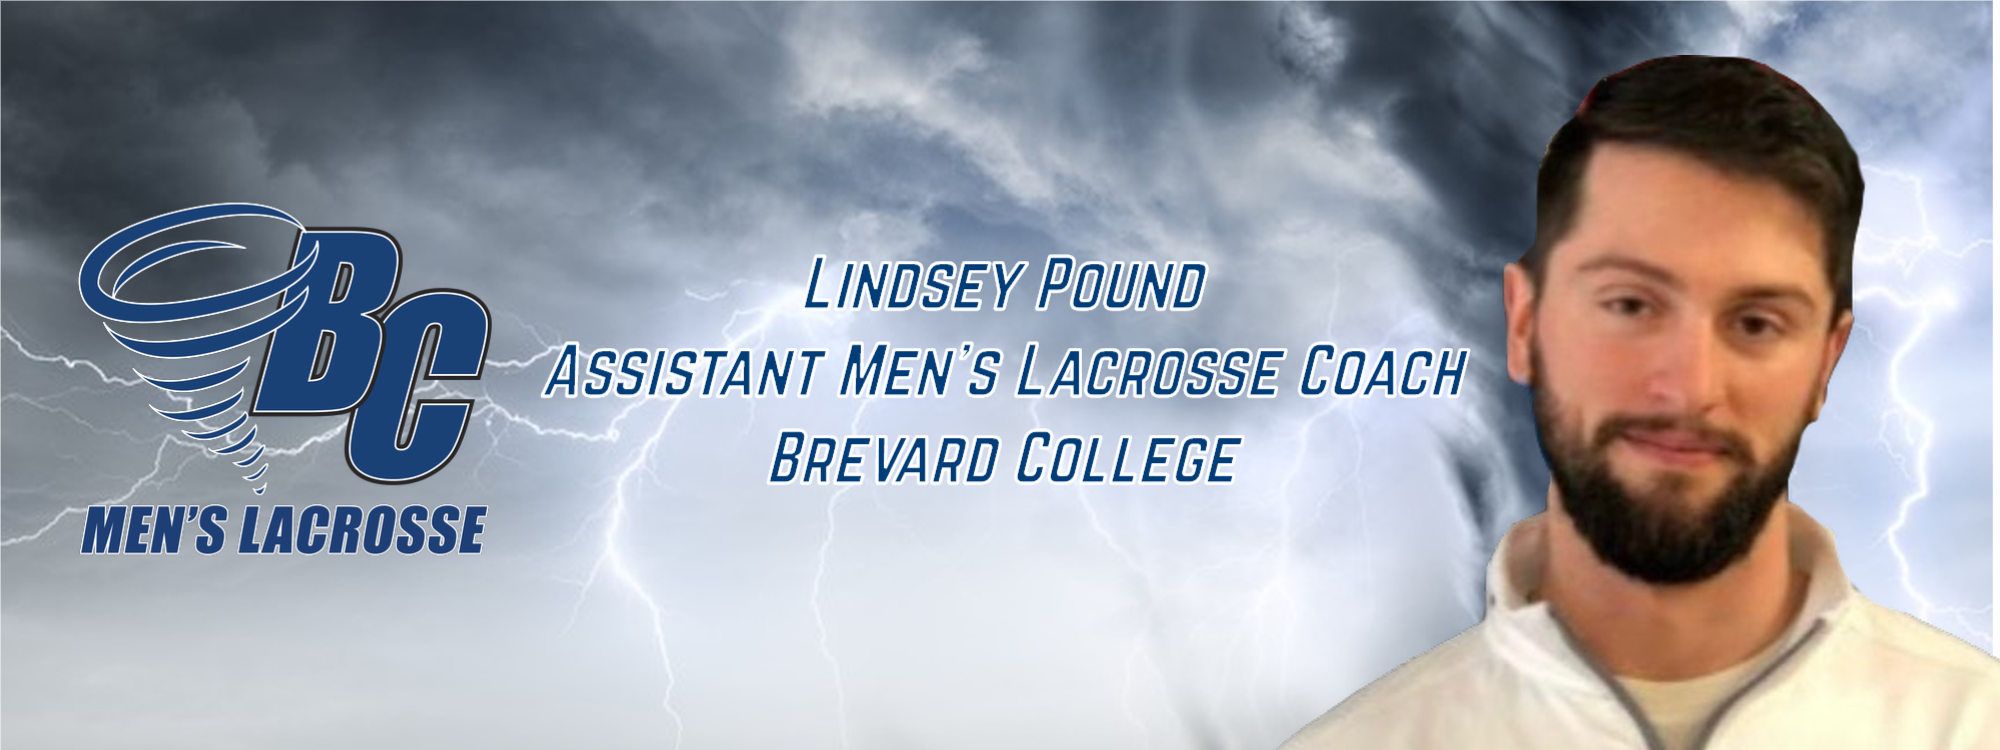 Pound Named Brevard College Assistant Men’s Lacrosse Coach